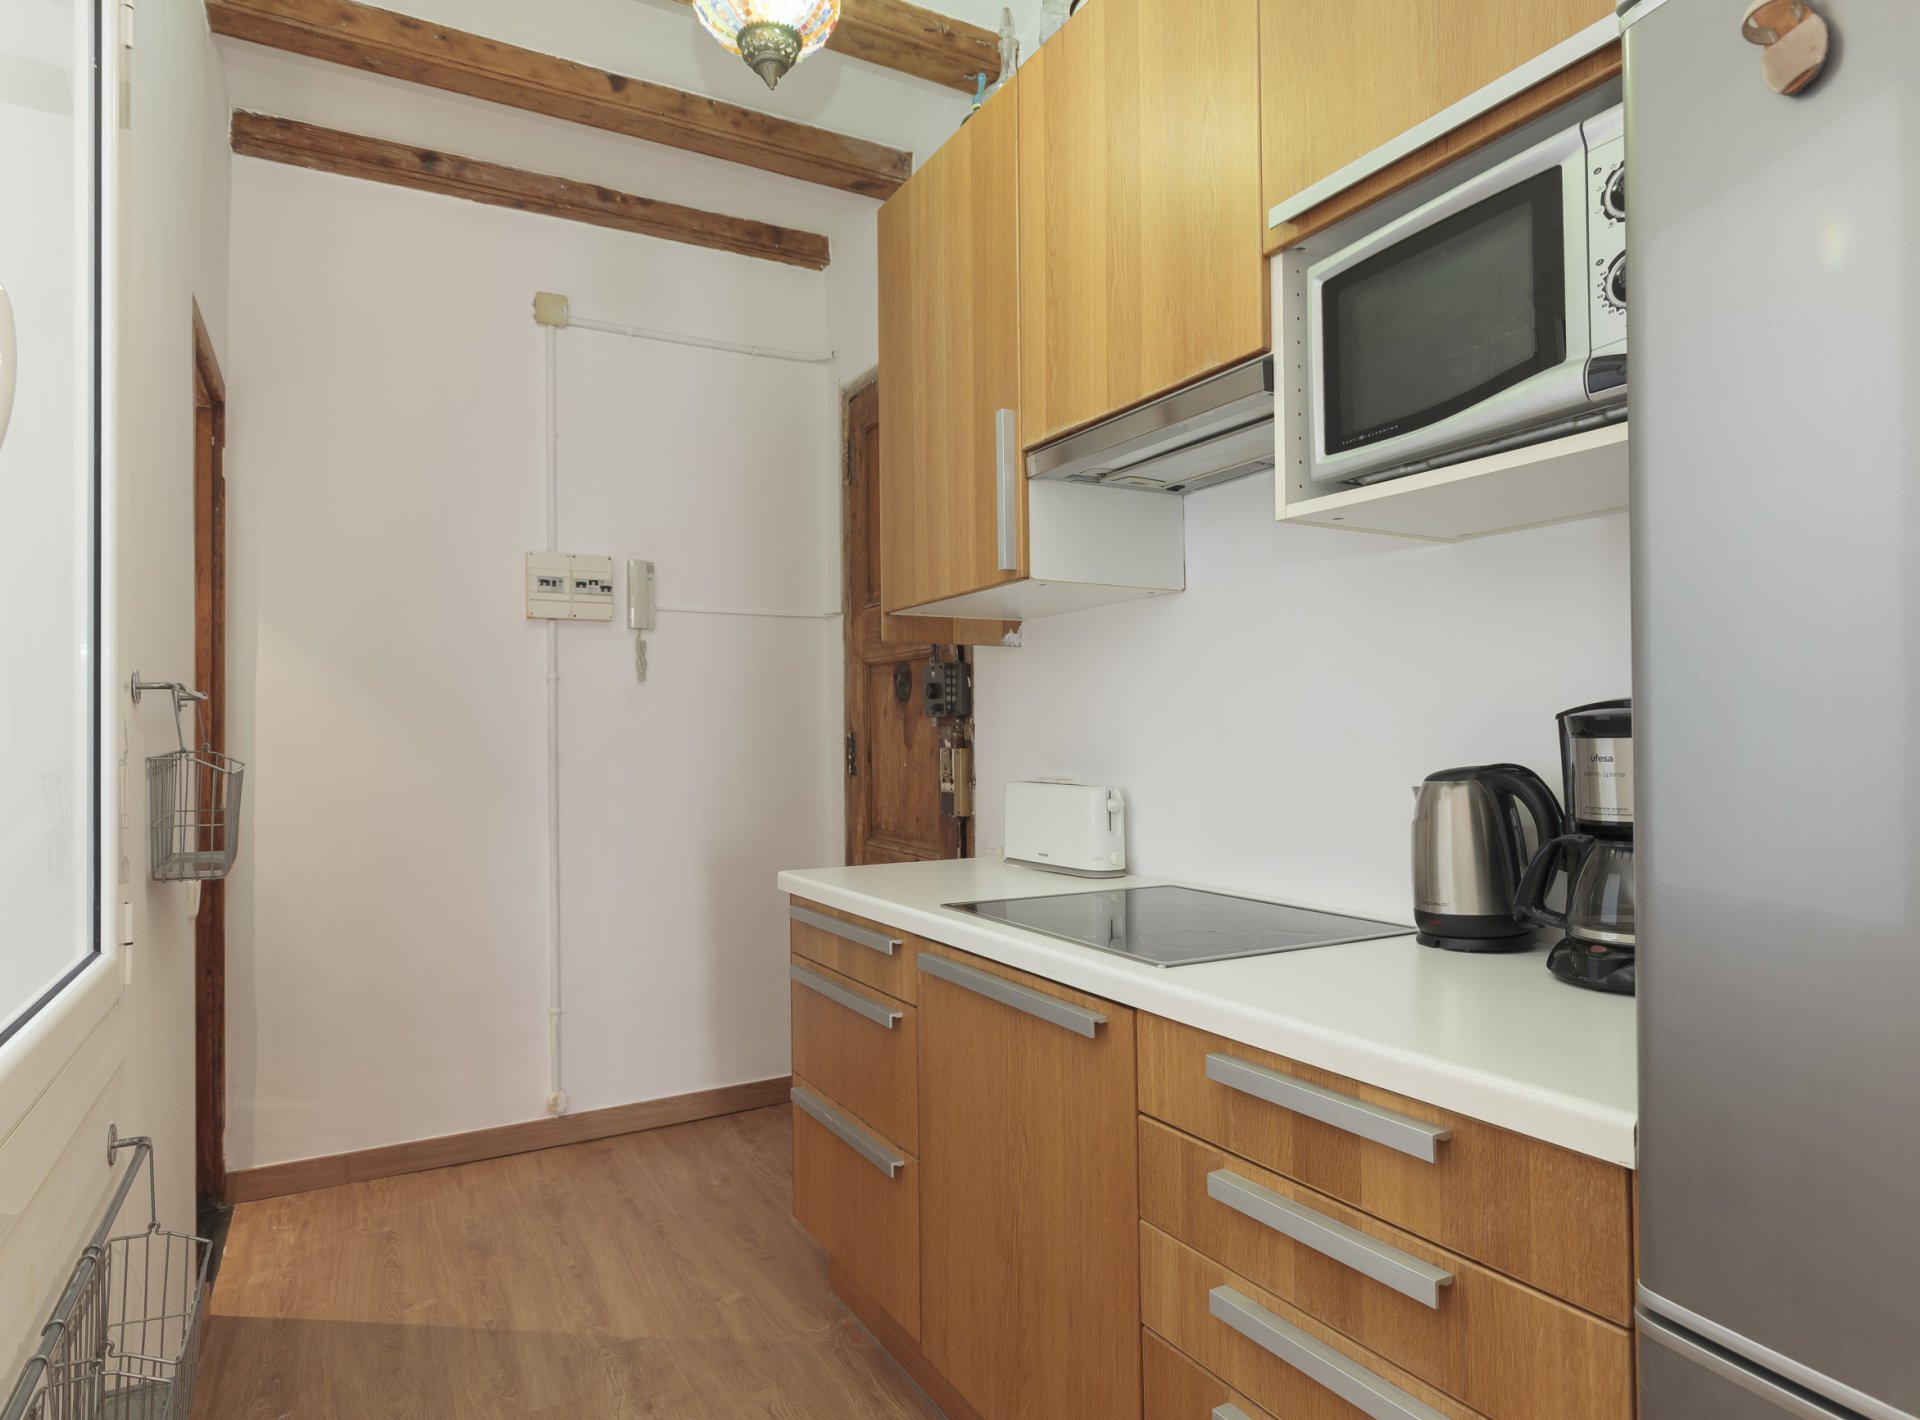 Authentic flat in Poble Sec - Paralelo